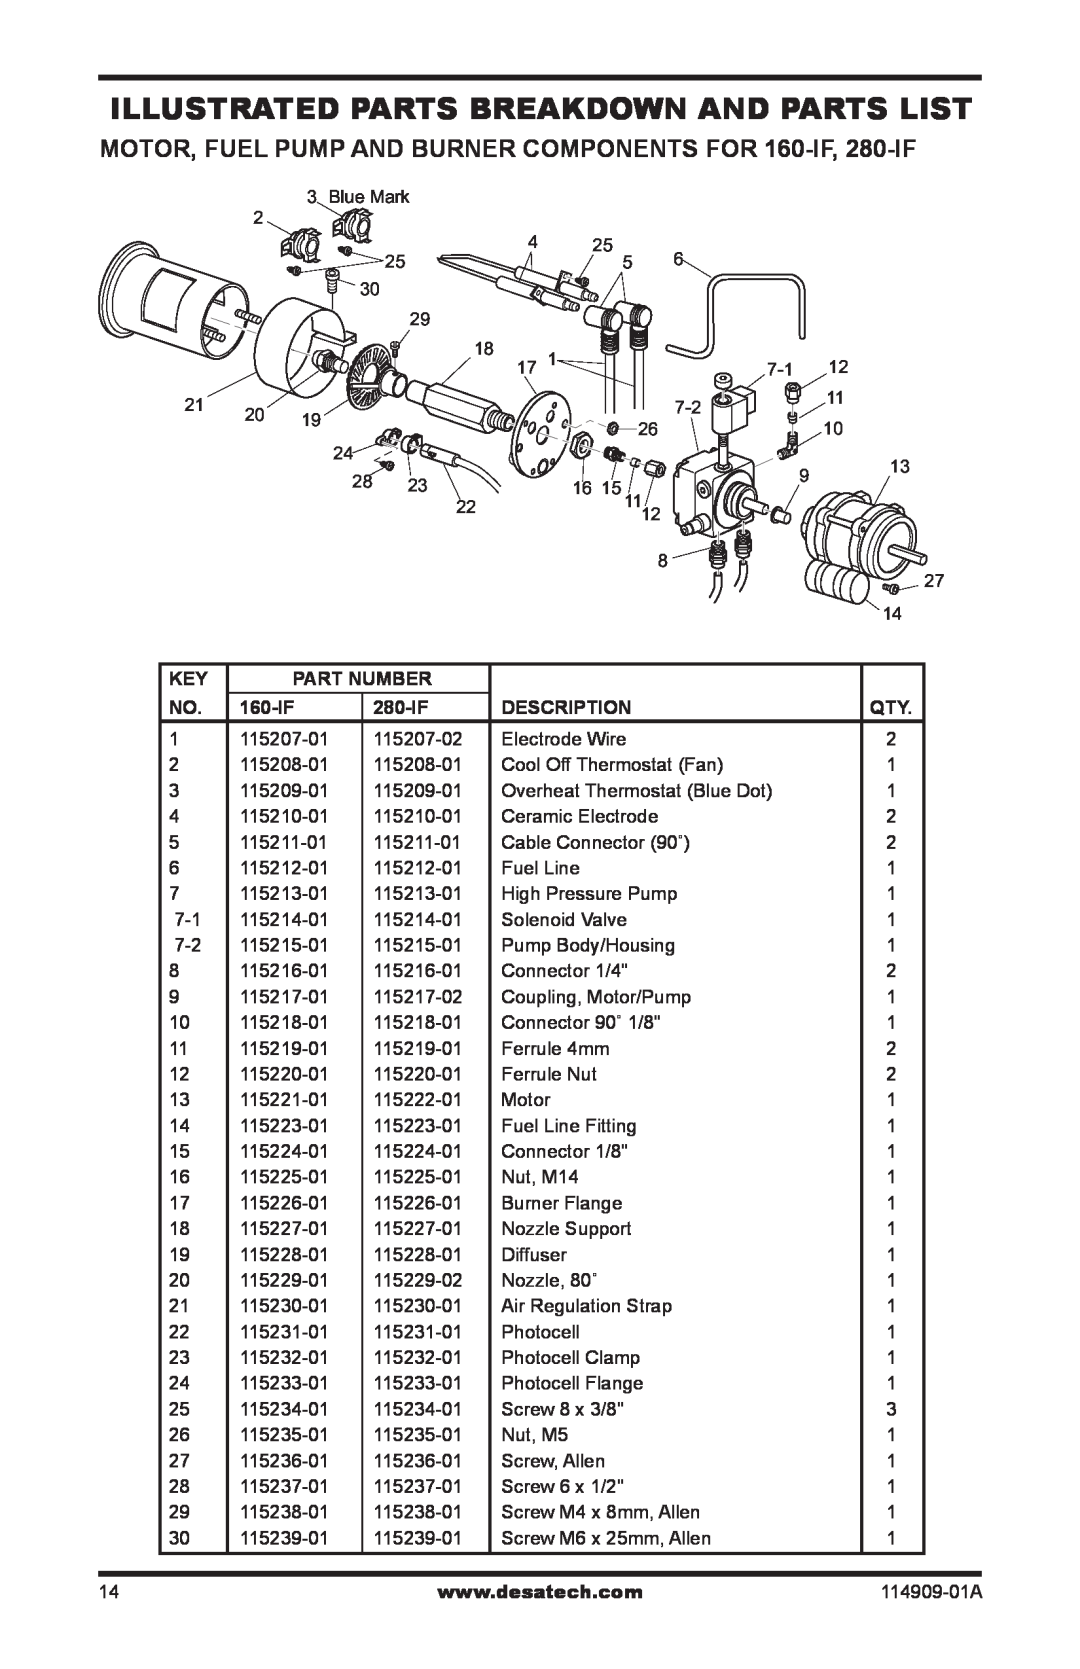 Desa 280-IF owner manual Illustrated Parts Breakdown And Parts List, Part Number, 160-IF, Description 